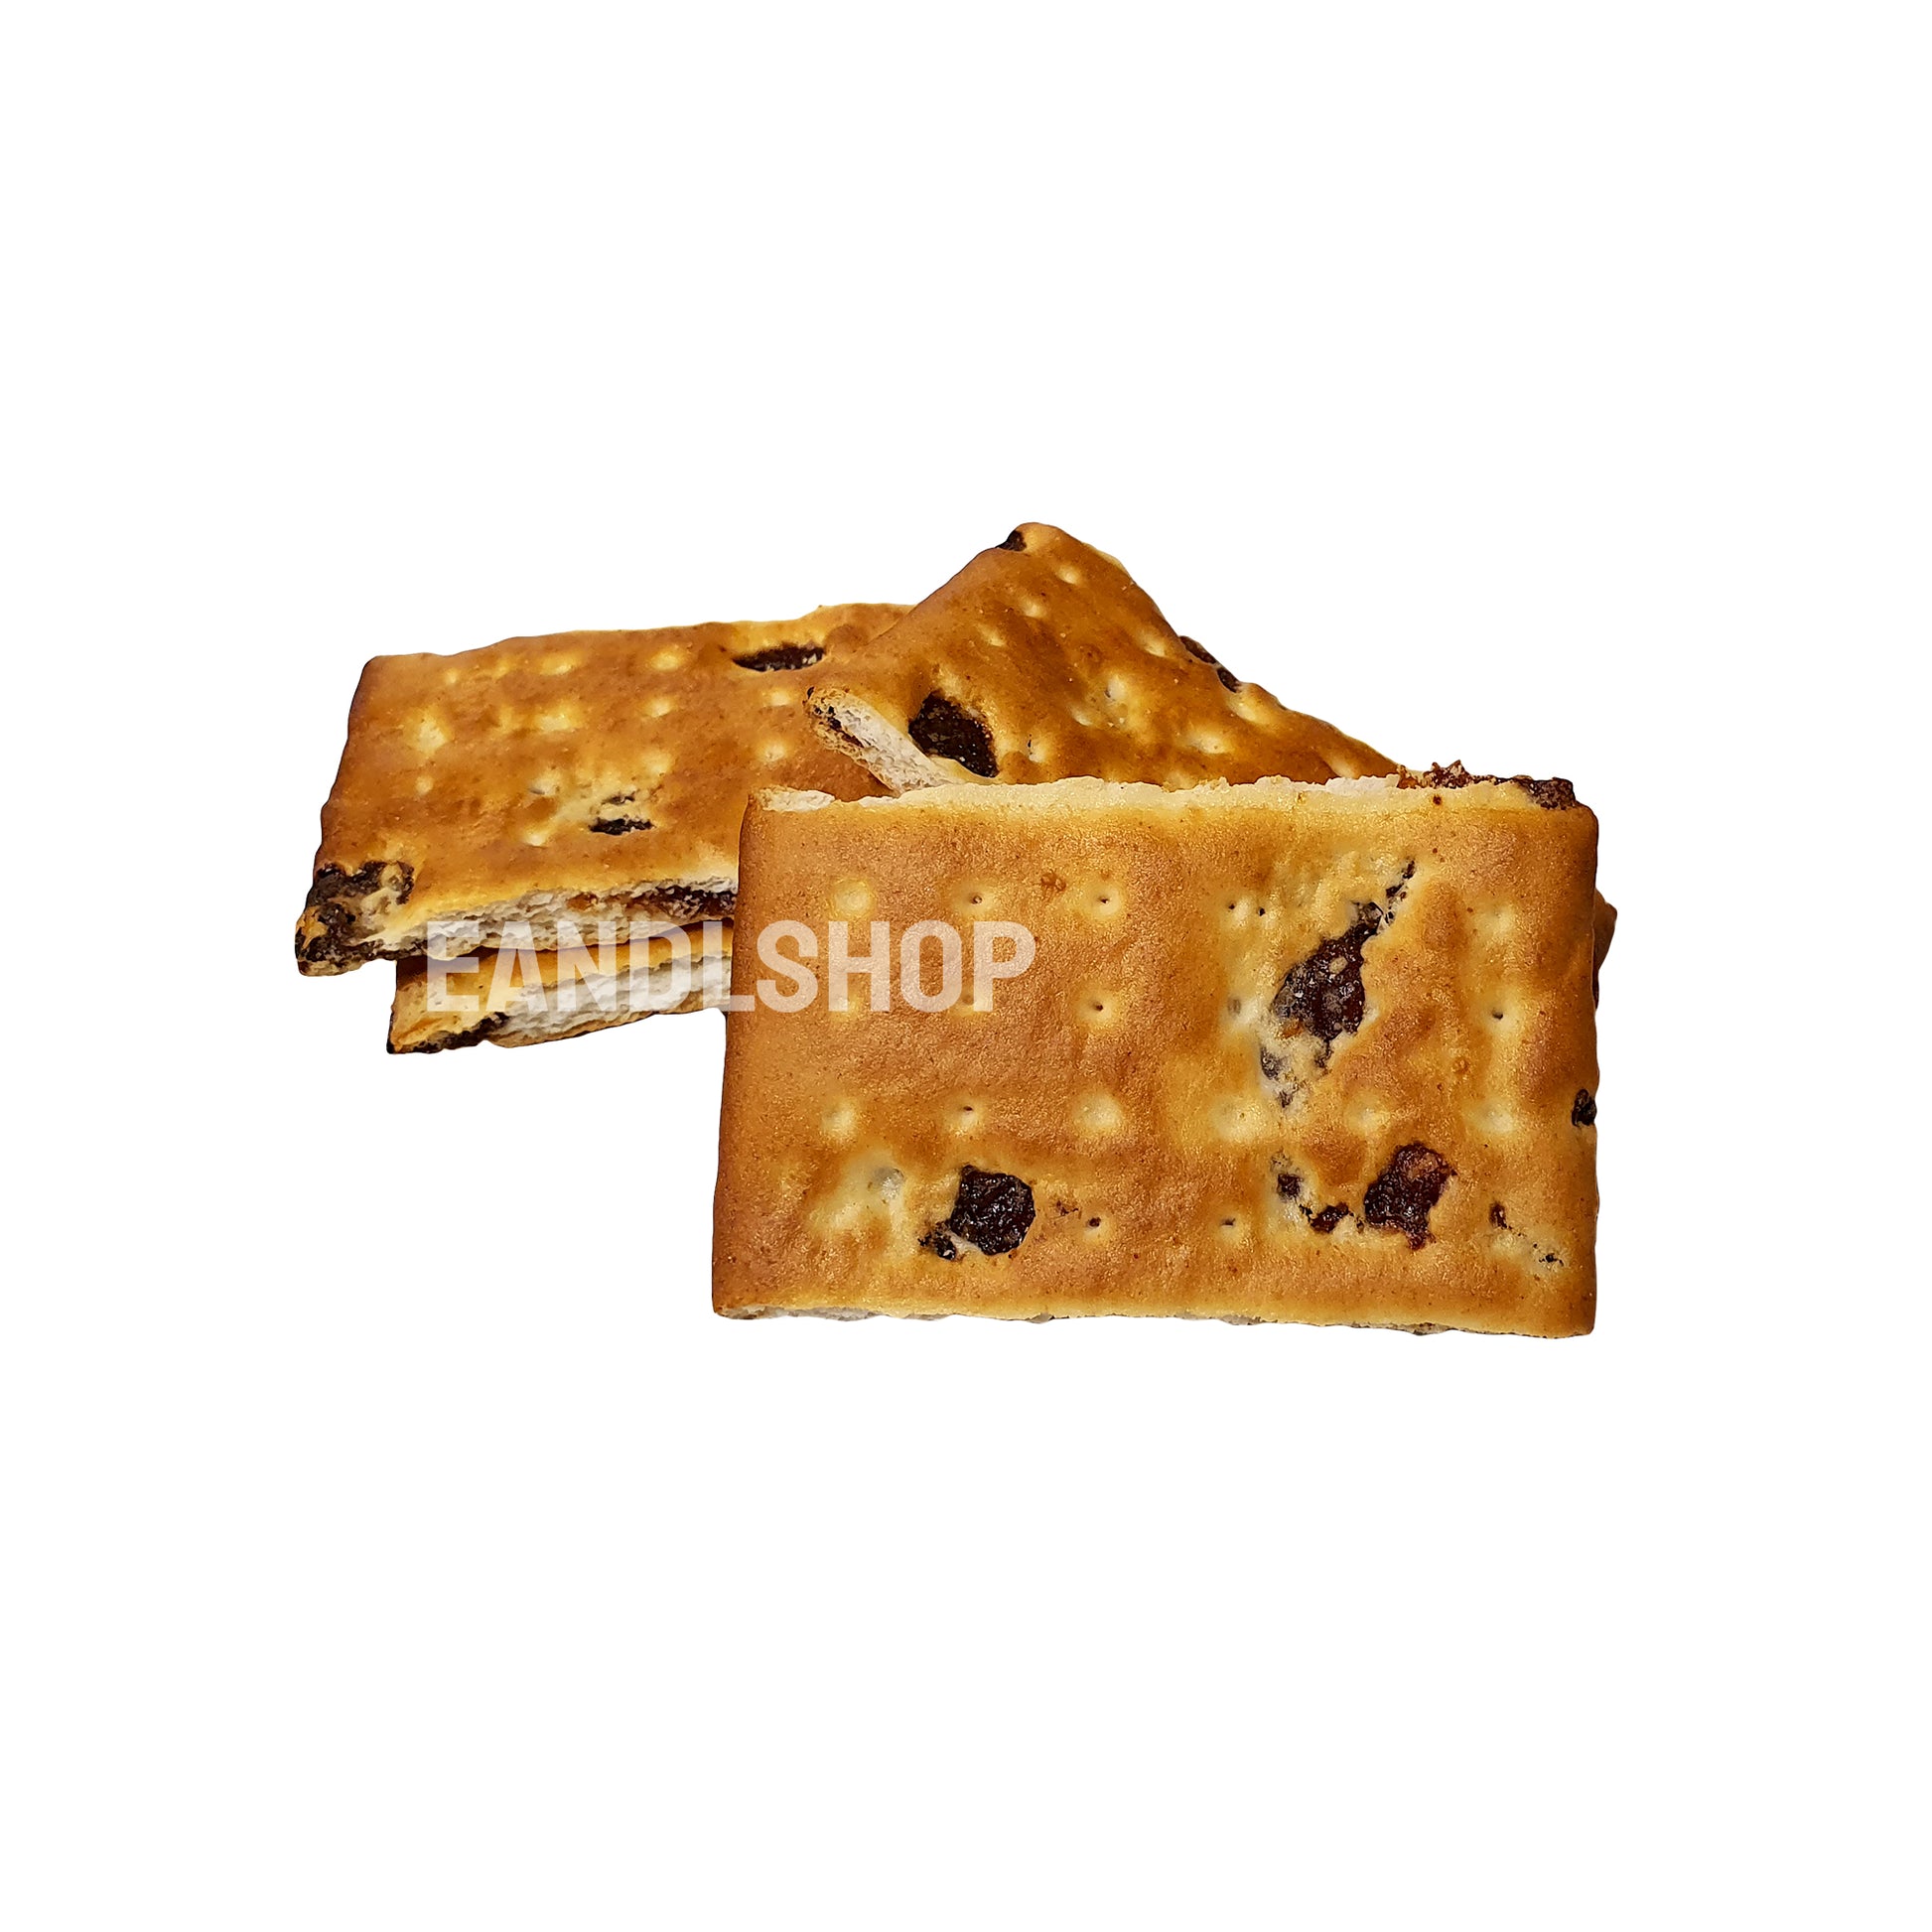 Sultana Biscuit. Old-school biscuits, modern snacks (chips, crackers), cakes, gummies, plums, dried fruits, nuts, herbal tea – available at www.EANDLSHOP.com